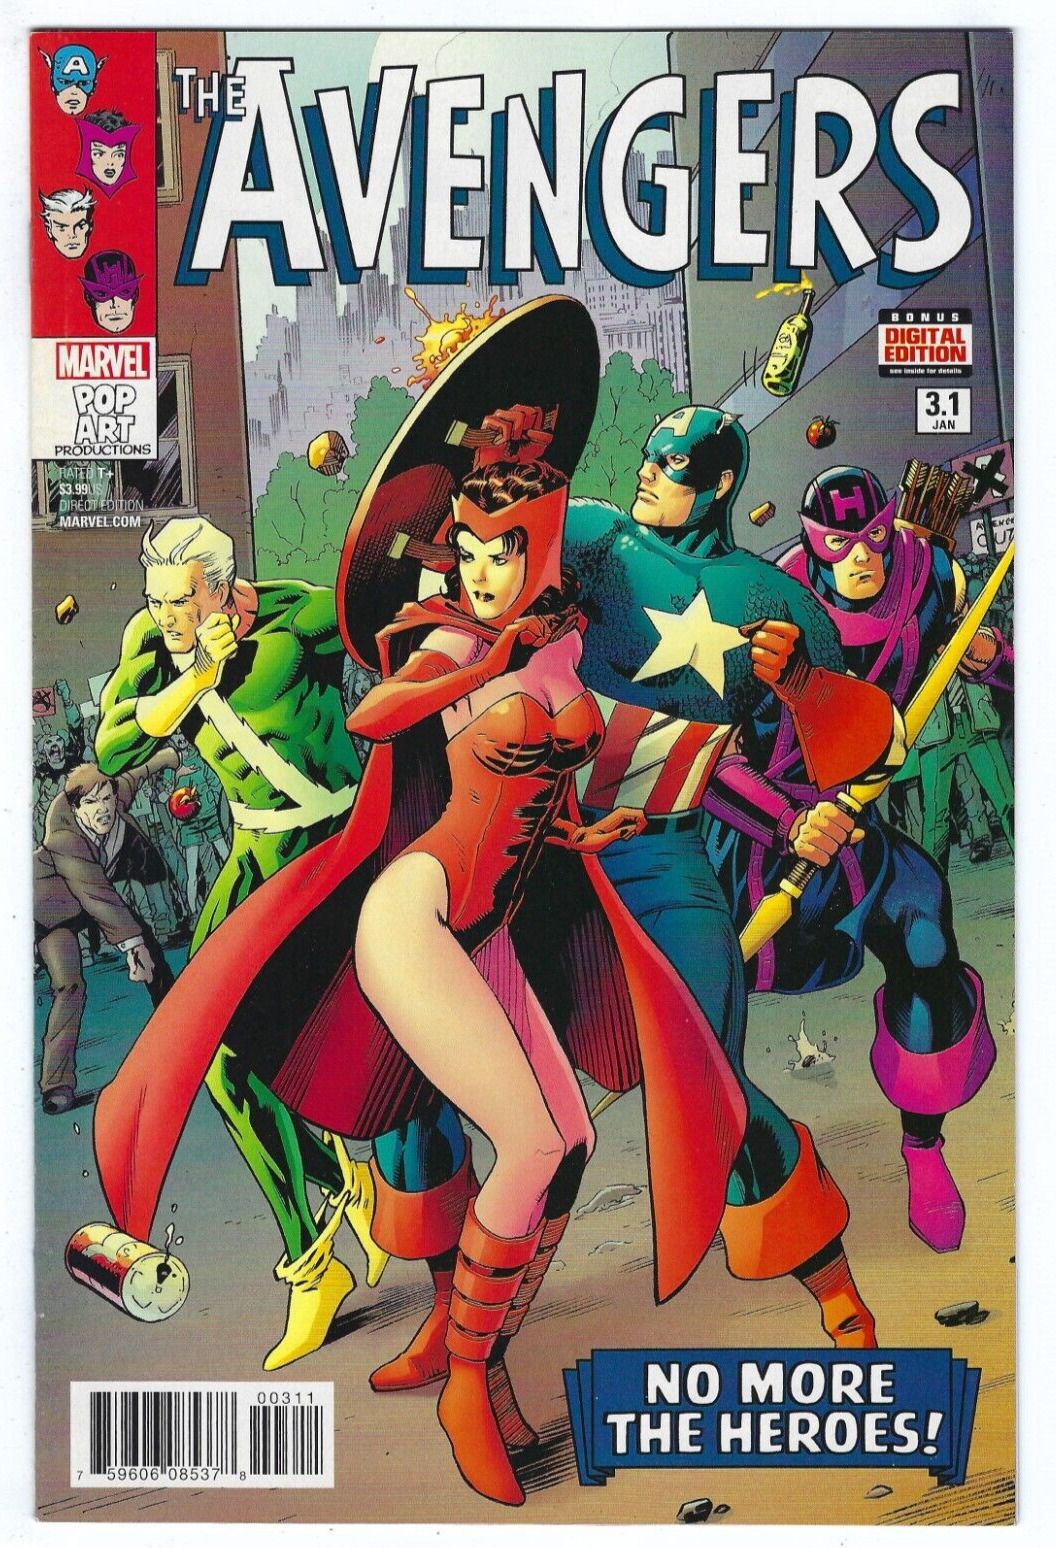 Marvel Comics AVENGERS #3.1 first printing cover A